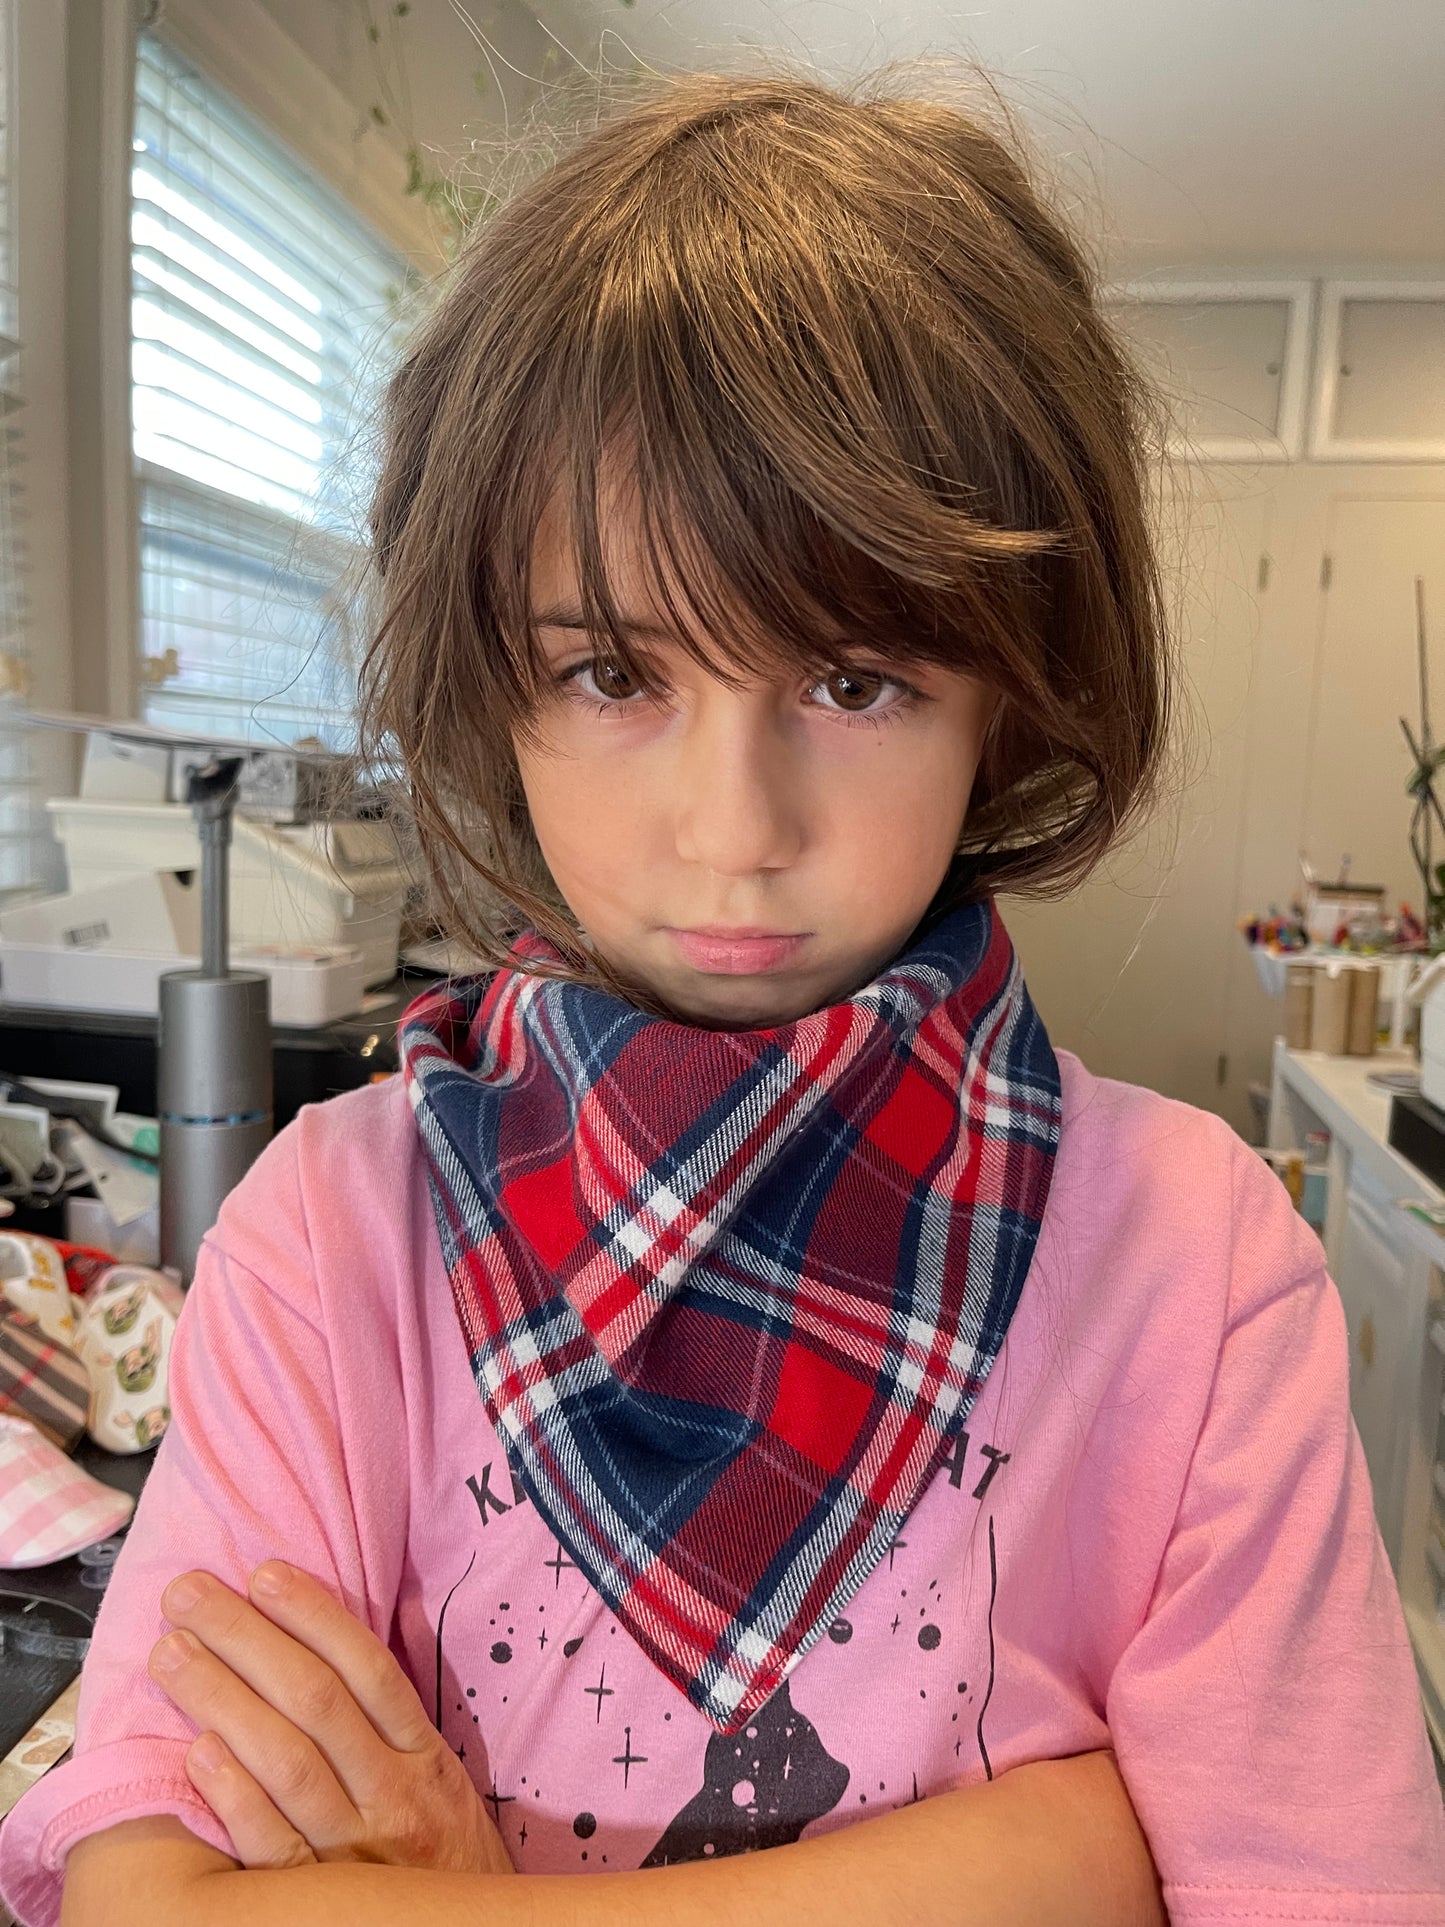 super happy 8 year old modeling bandana scarf to demonstrate sizing perspective